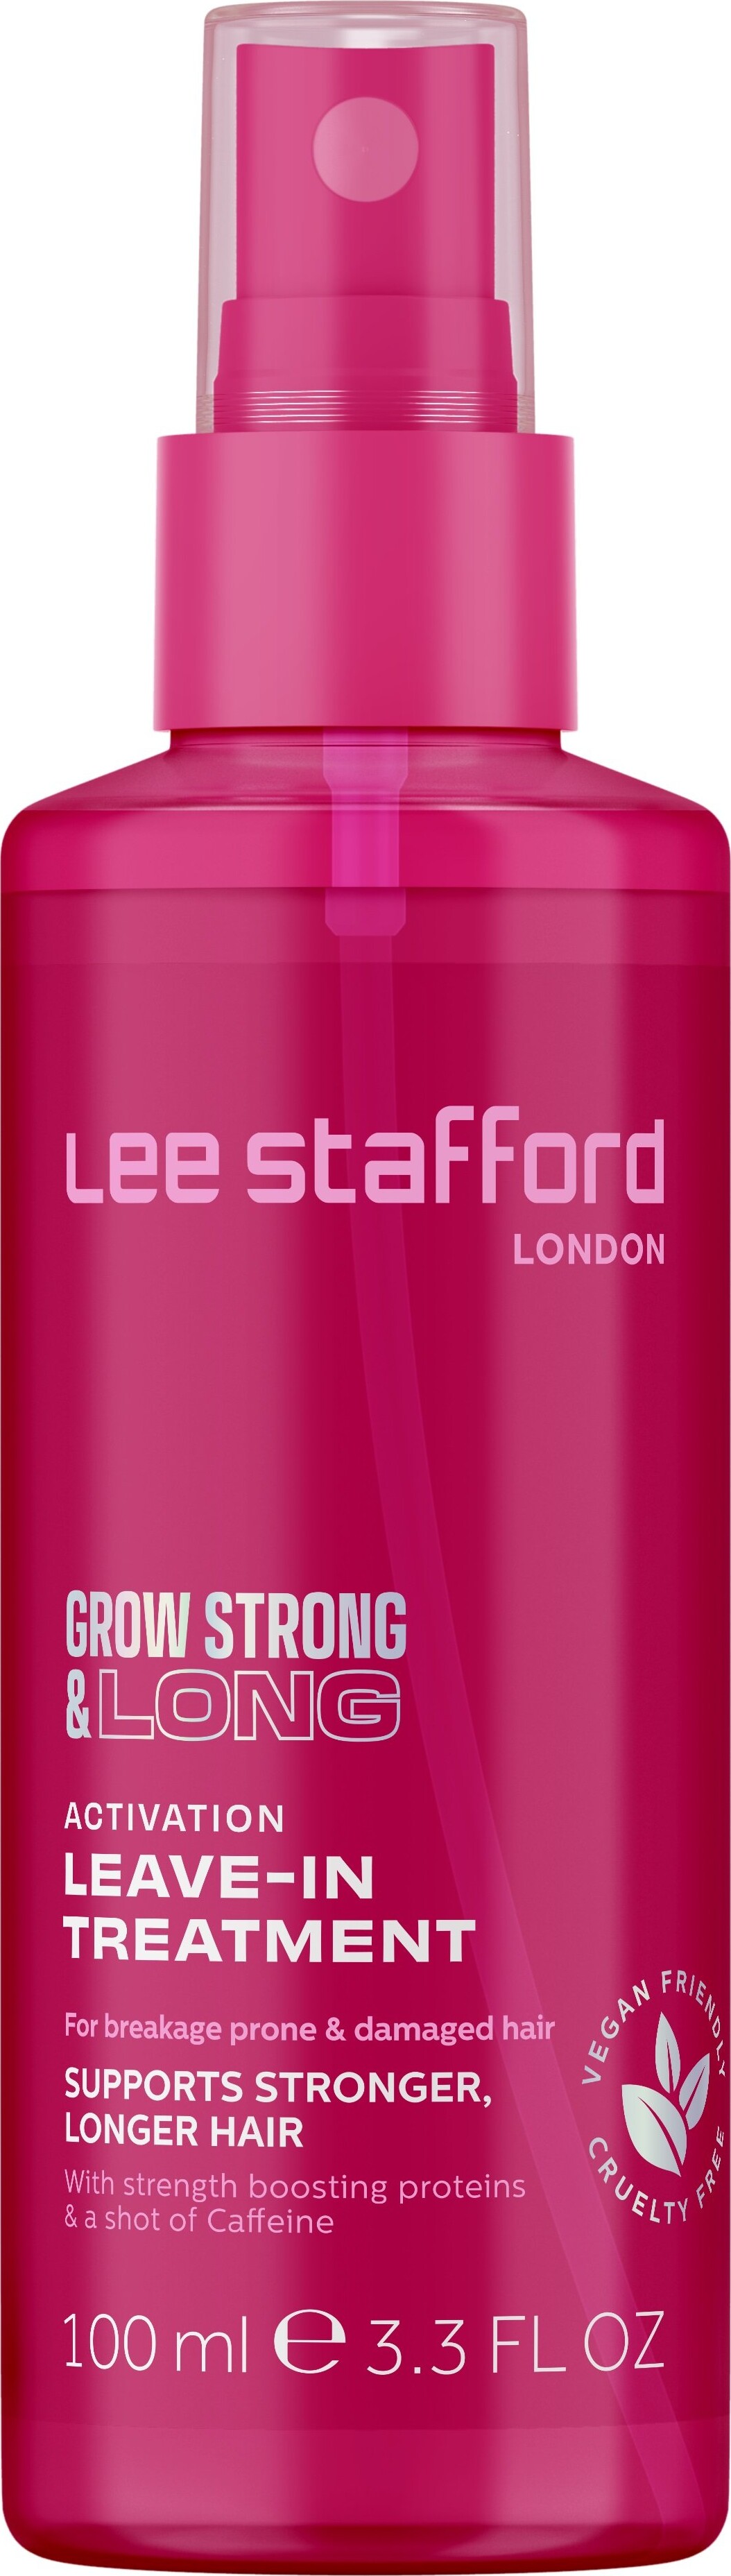 Se Lee Stafford - Grow Strong & Long Activation Leave-in Treatment - 100 Ml hos Gucca.dk